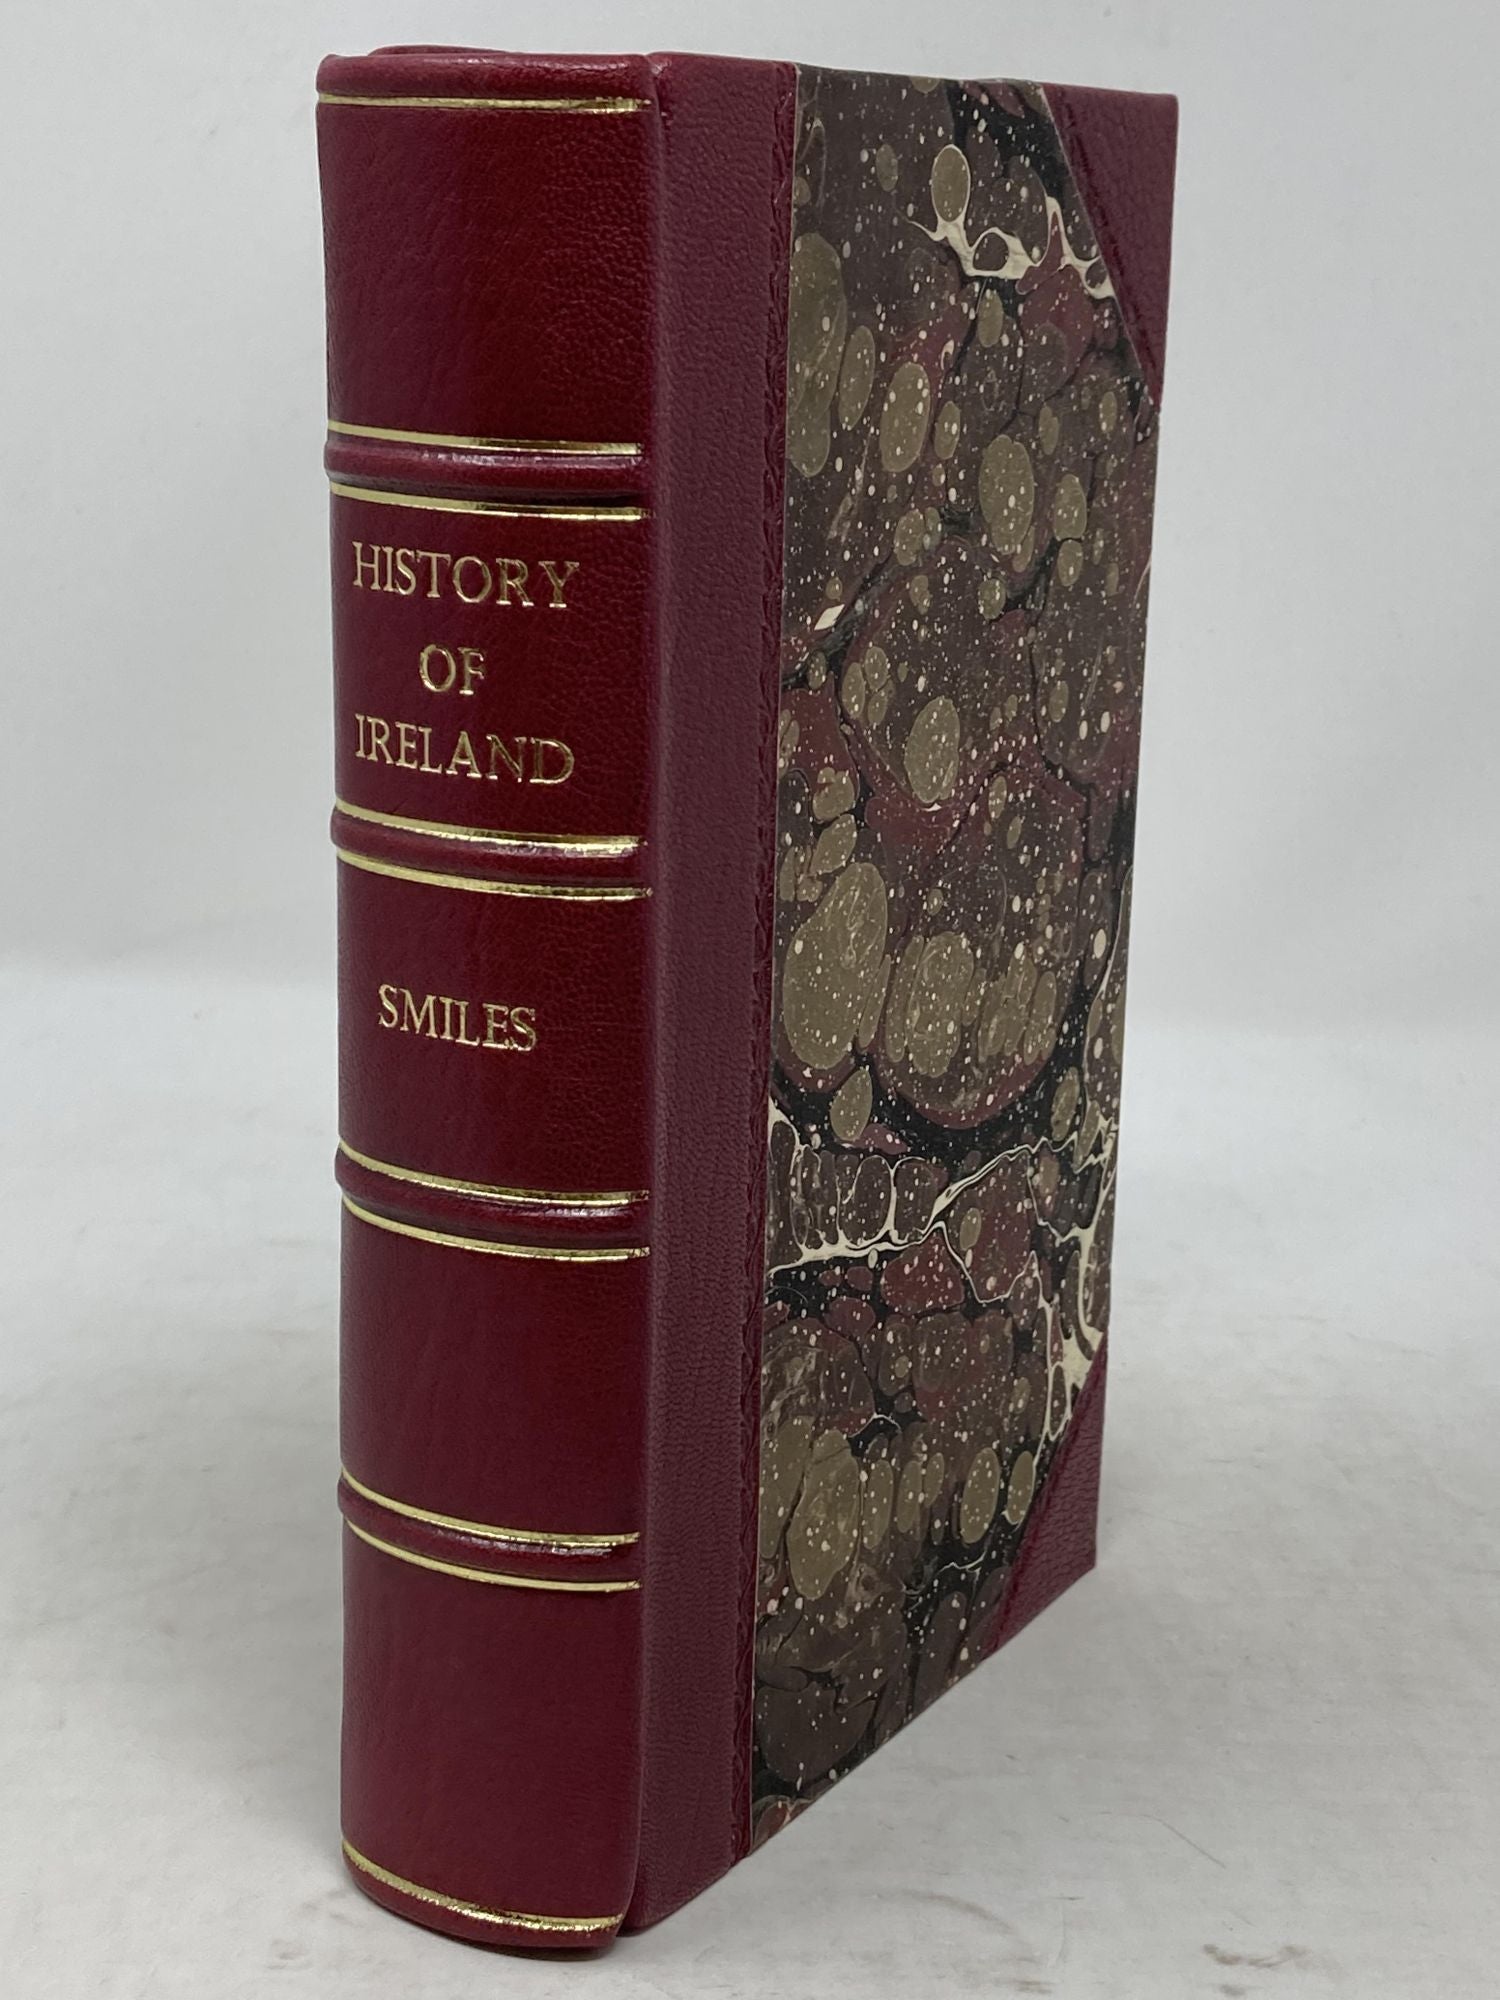 Smiles, Samuel - History of Ireland and the Irish People Under the Government of England